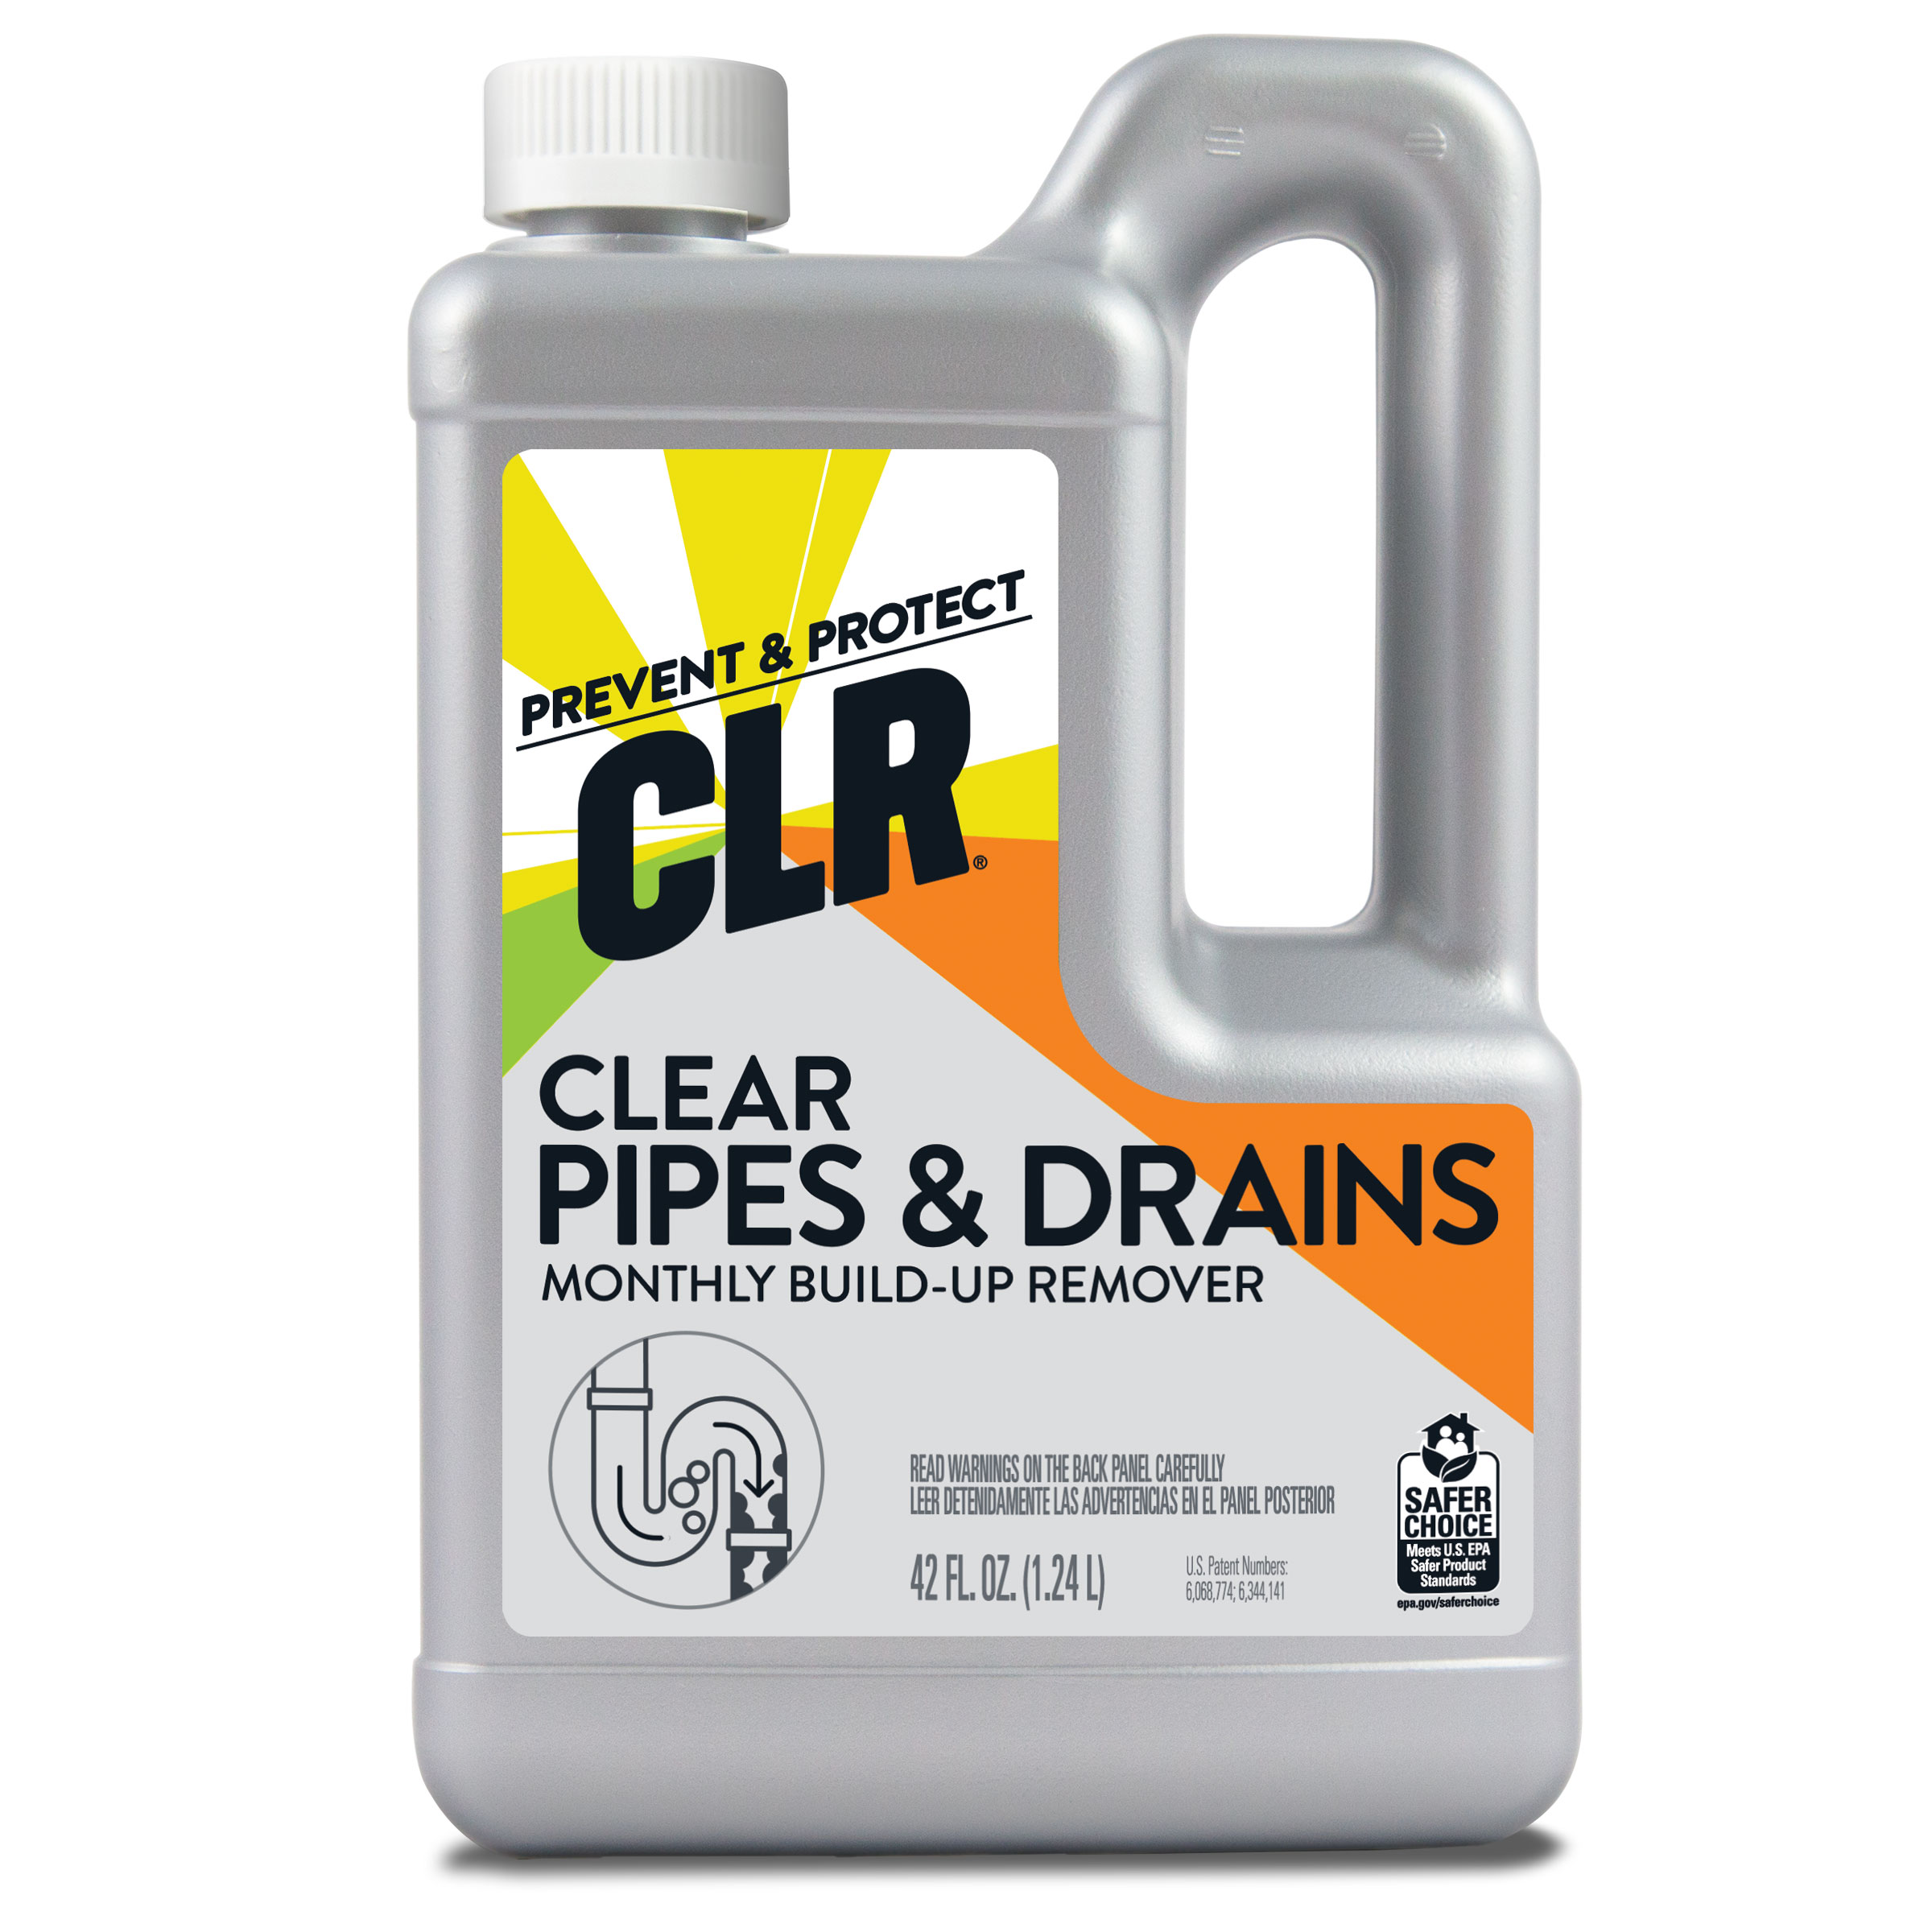 Clearing Drains with Drain Weasel 